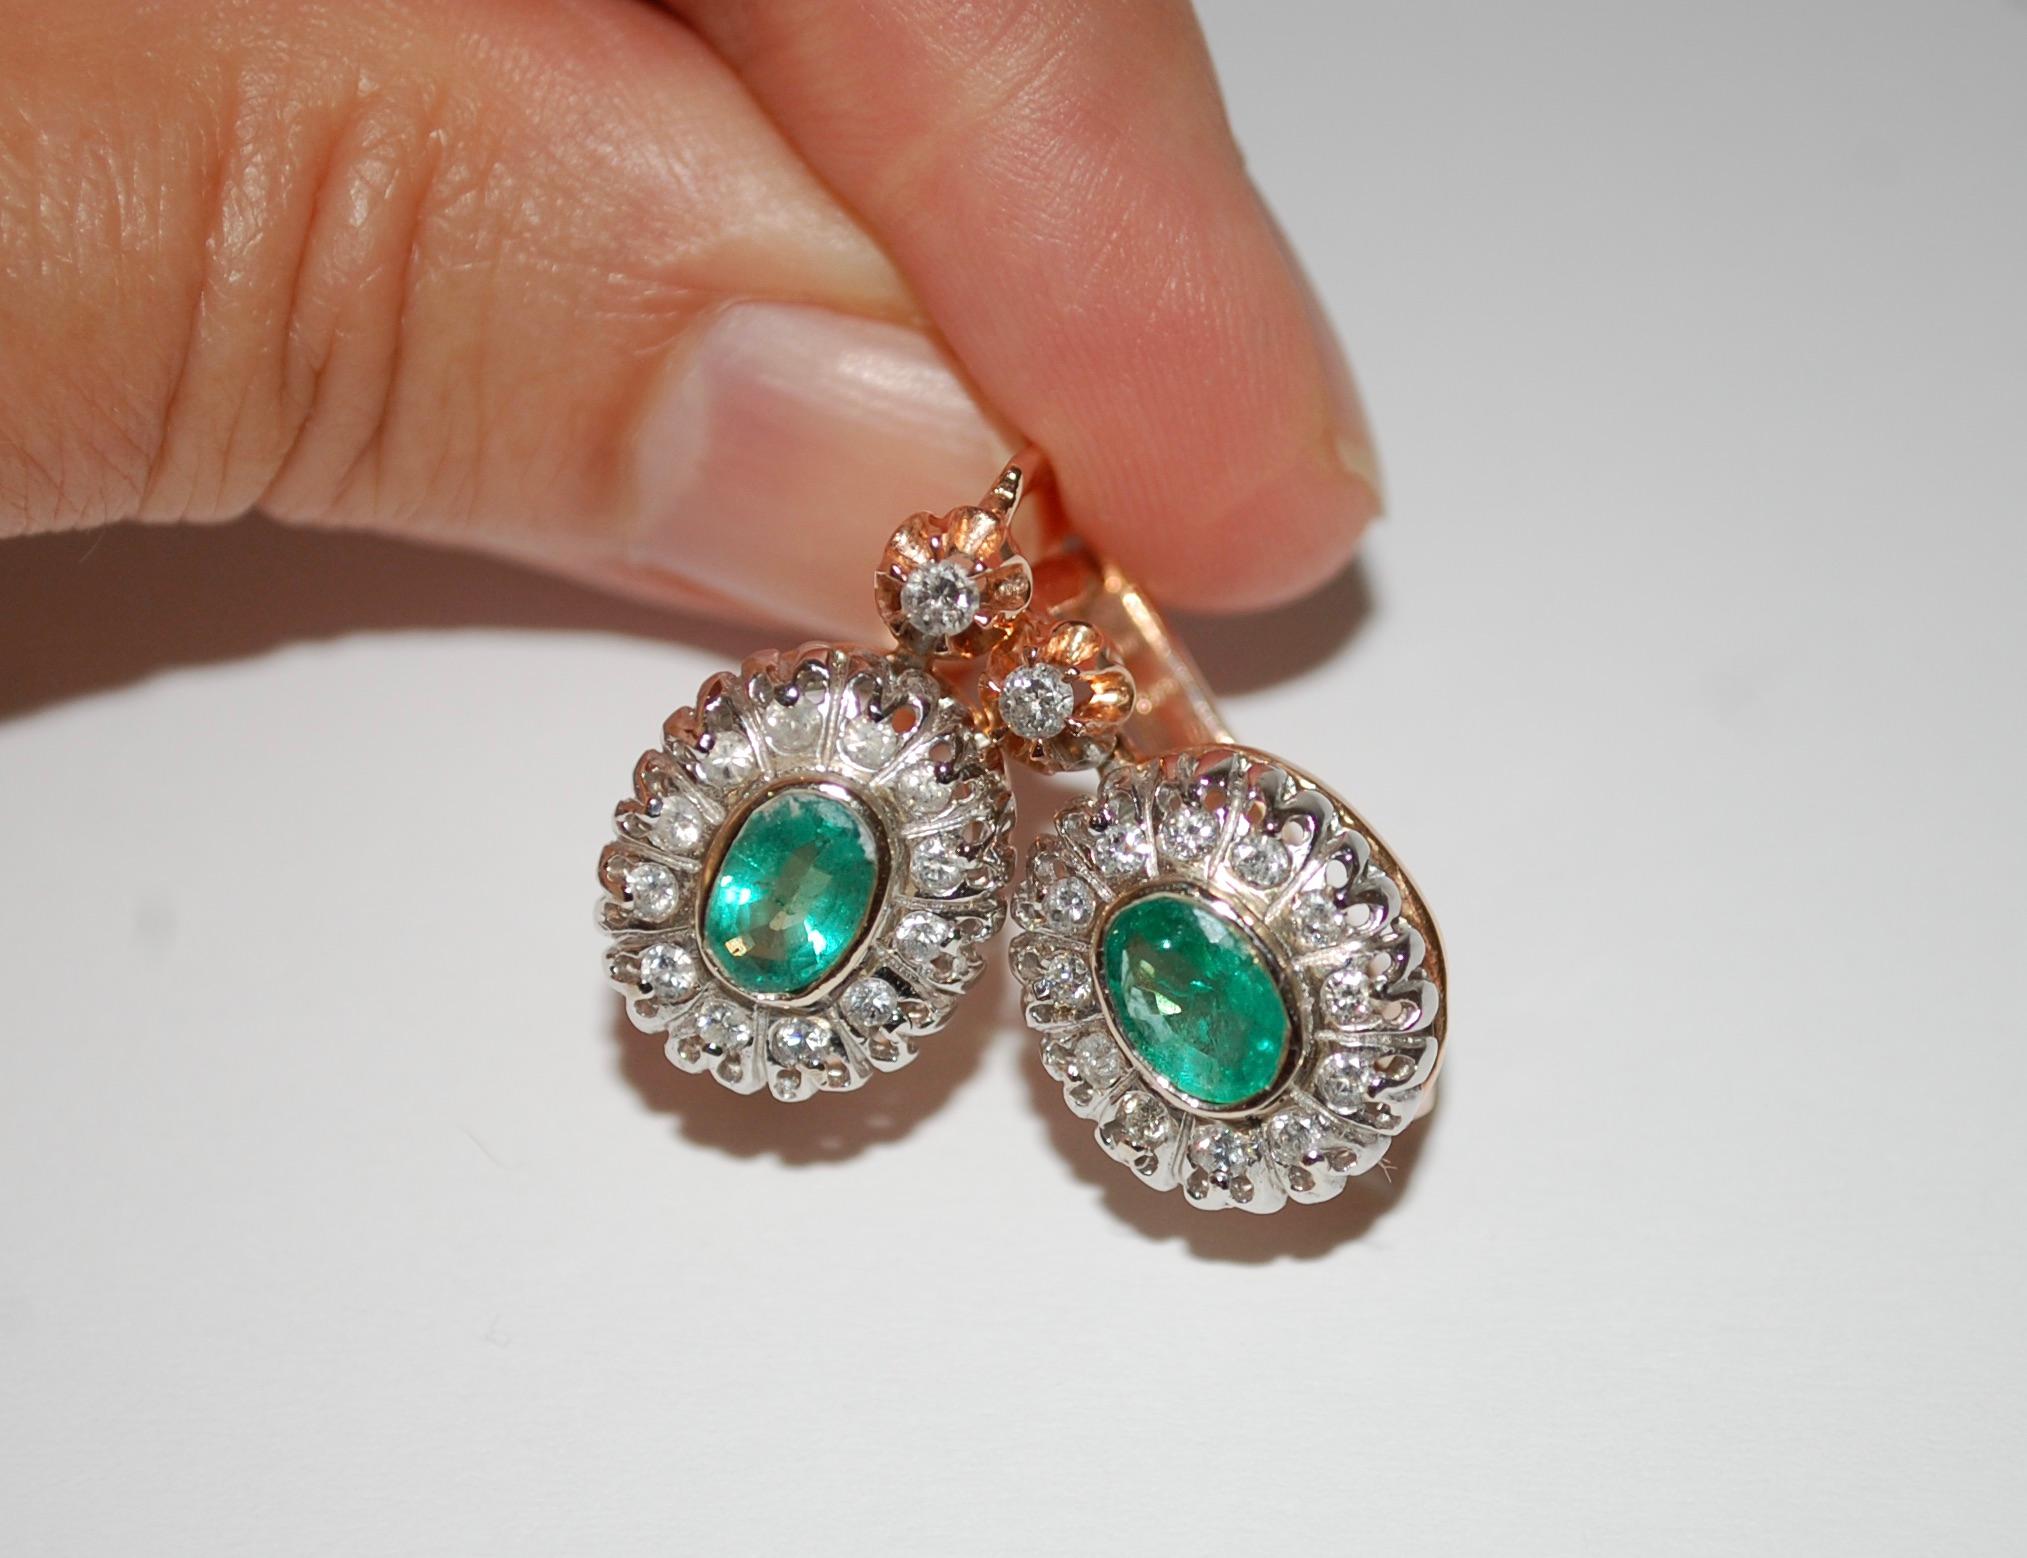 Antique Gold Emerald and Diamond Earrings and Ring For Sale 1